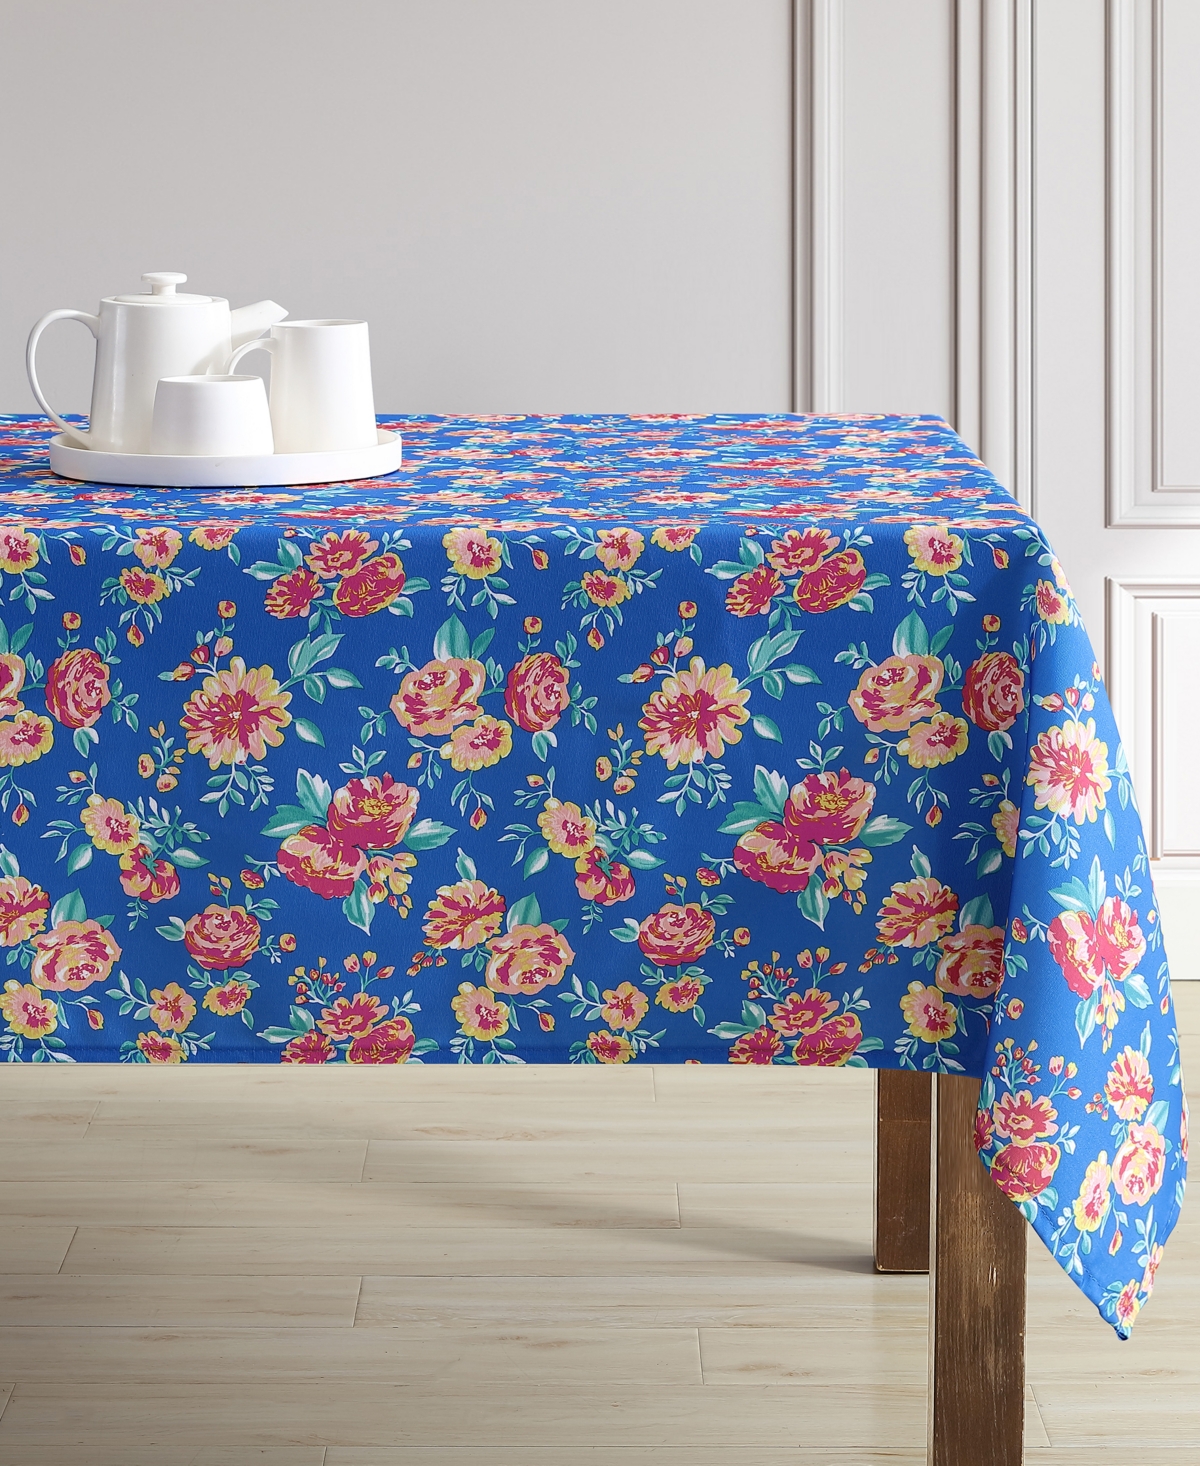 Laura Ashley Easy Care Tablecloth, 60" X 102" In Aviva Floral